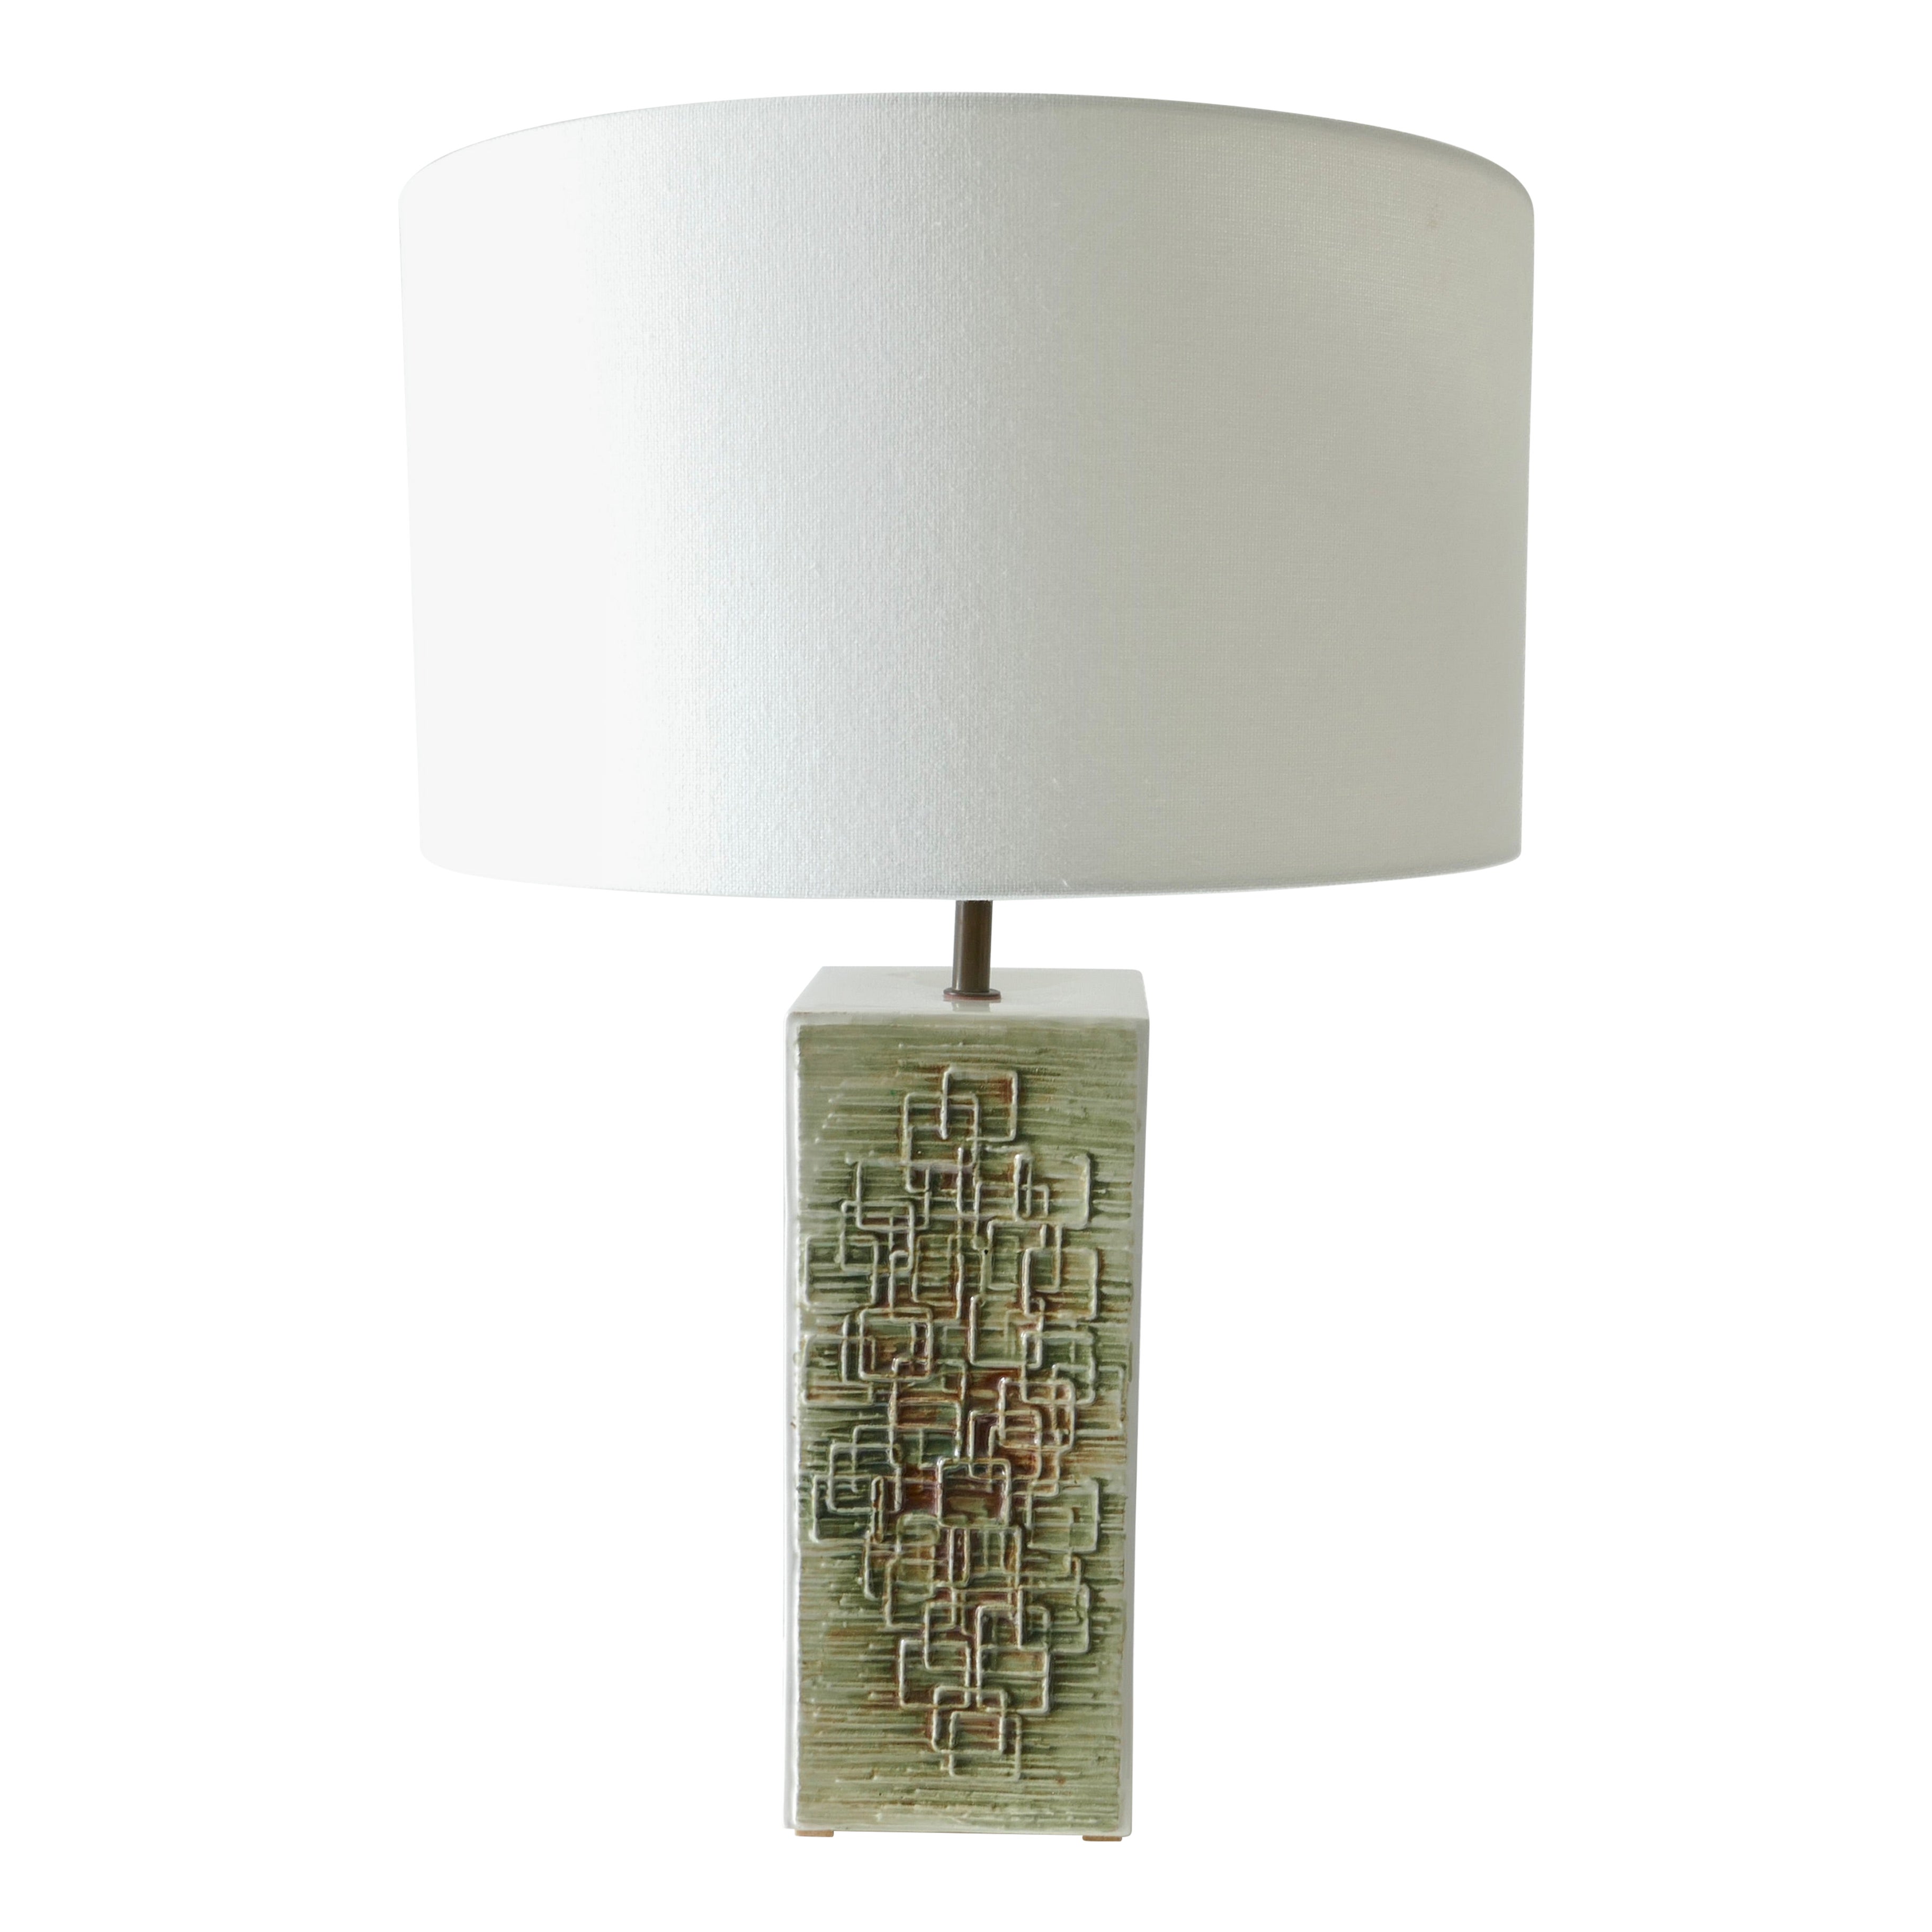 Green Tone Ceramic Table Lamp, 1960s For Sale